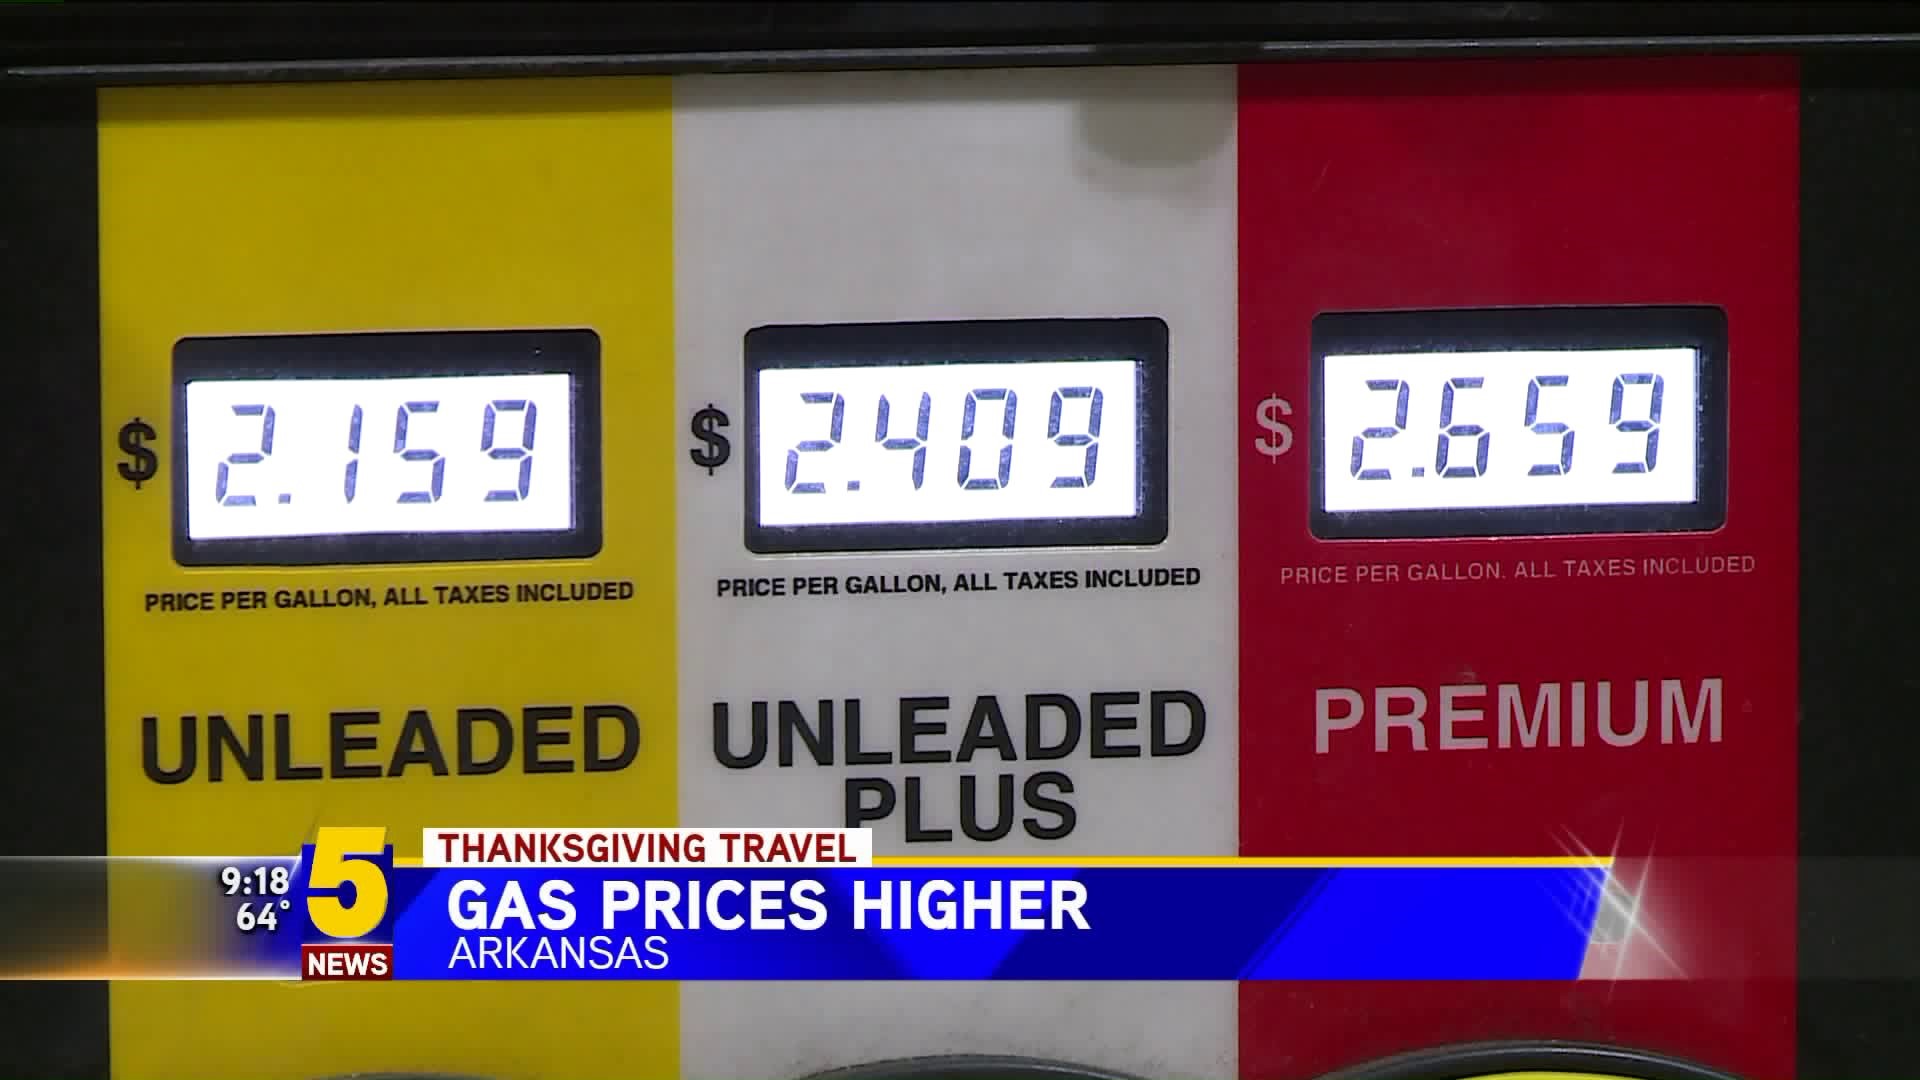 Arkansas Gas Prices Lower Than National Average But More Than In Recent